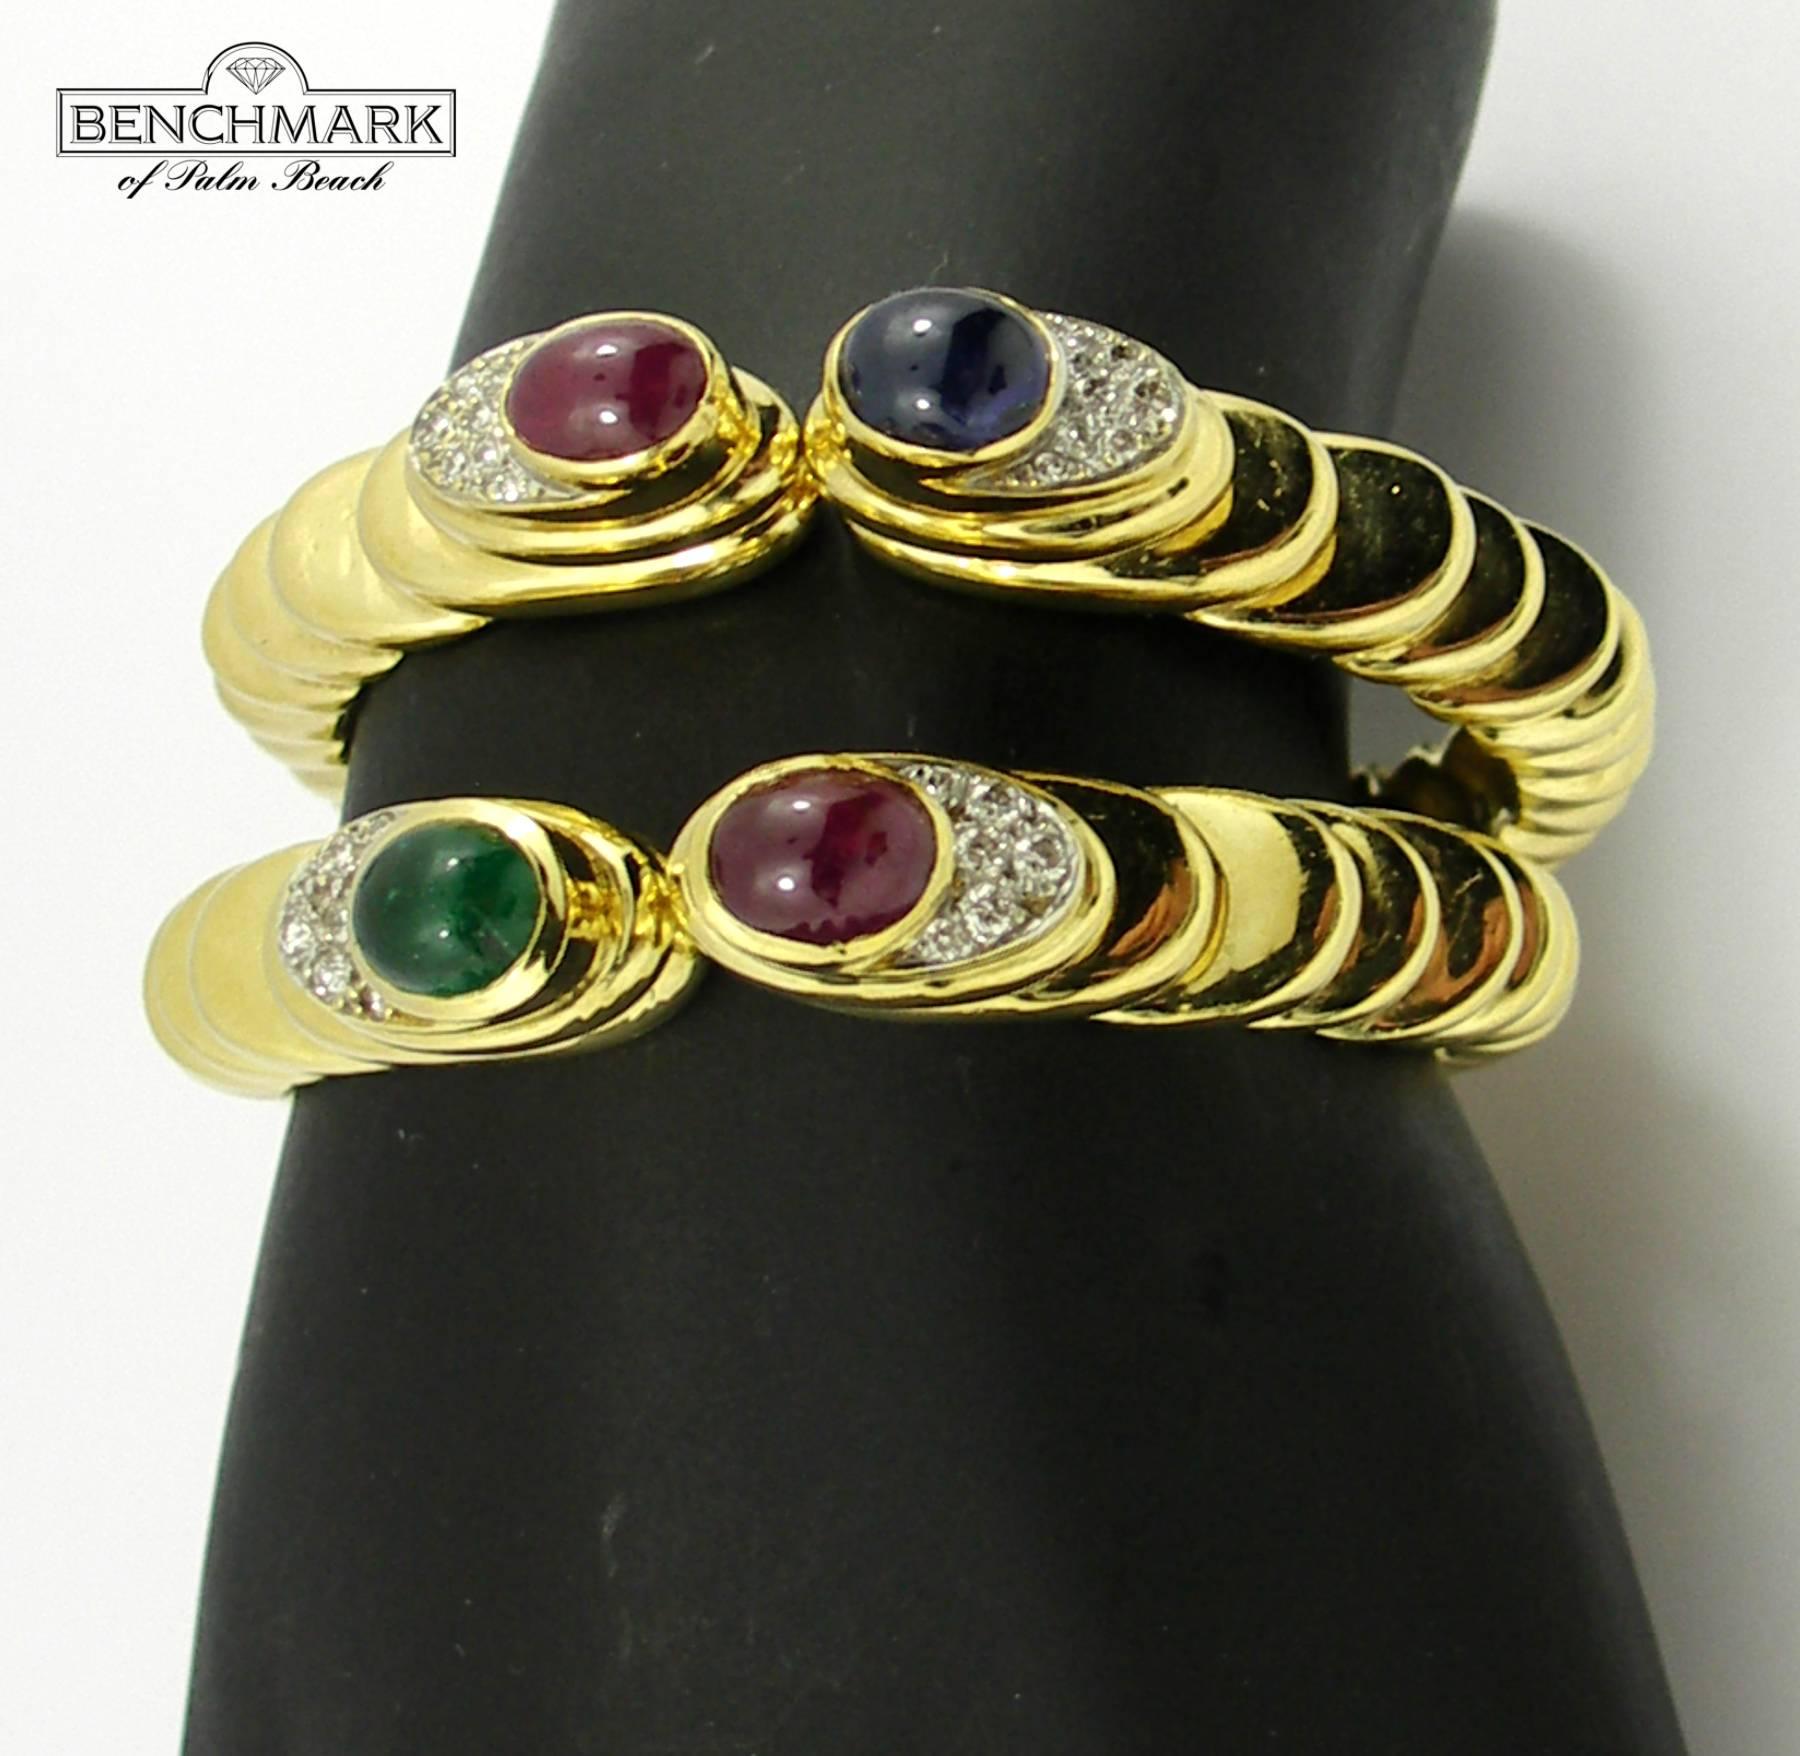 A pair of 18K yellow gold bracelets, of a split front and tiered design. Each bracelet has a bezel set cabochon ruby, and while one bracelet is set with an emerald, the other bracelet is set with a sapphire. The bracelets are also set with a total